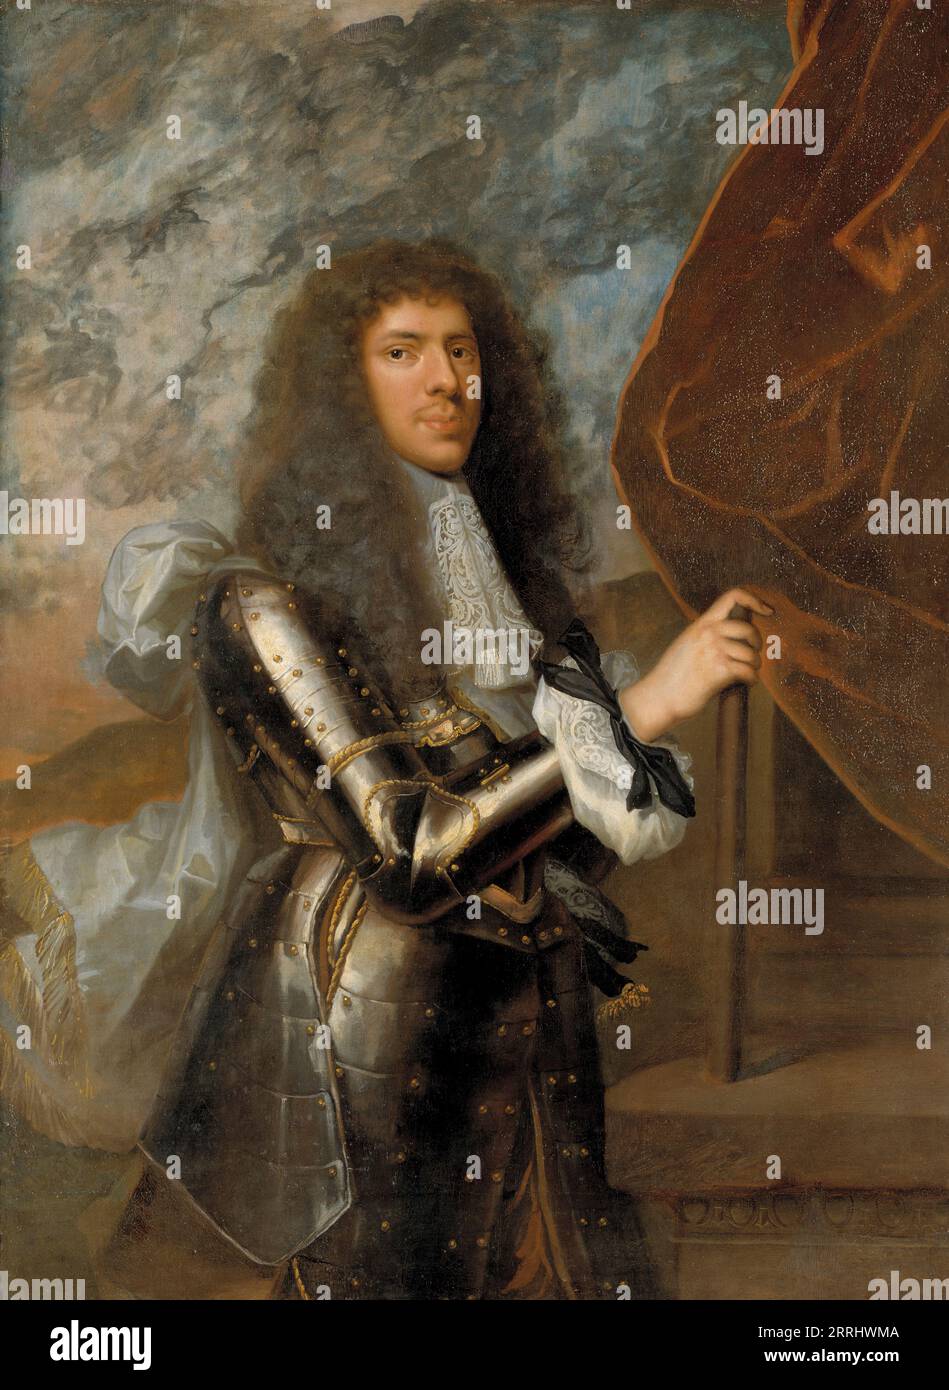 Eugen Mauritz, 1635-1673, Prince of Savoy, unknown date. Stock Photo